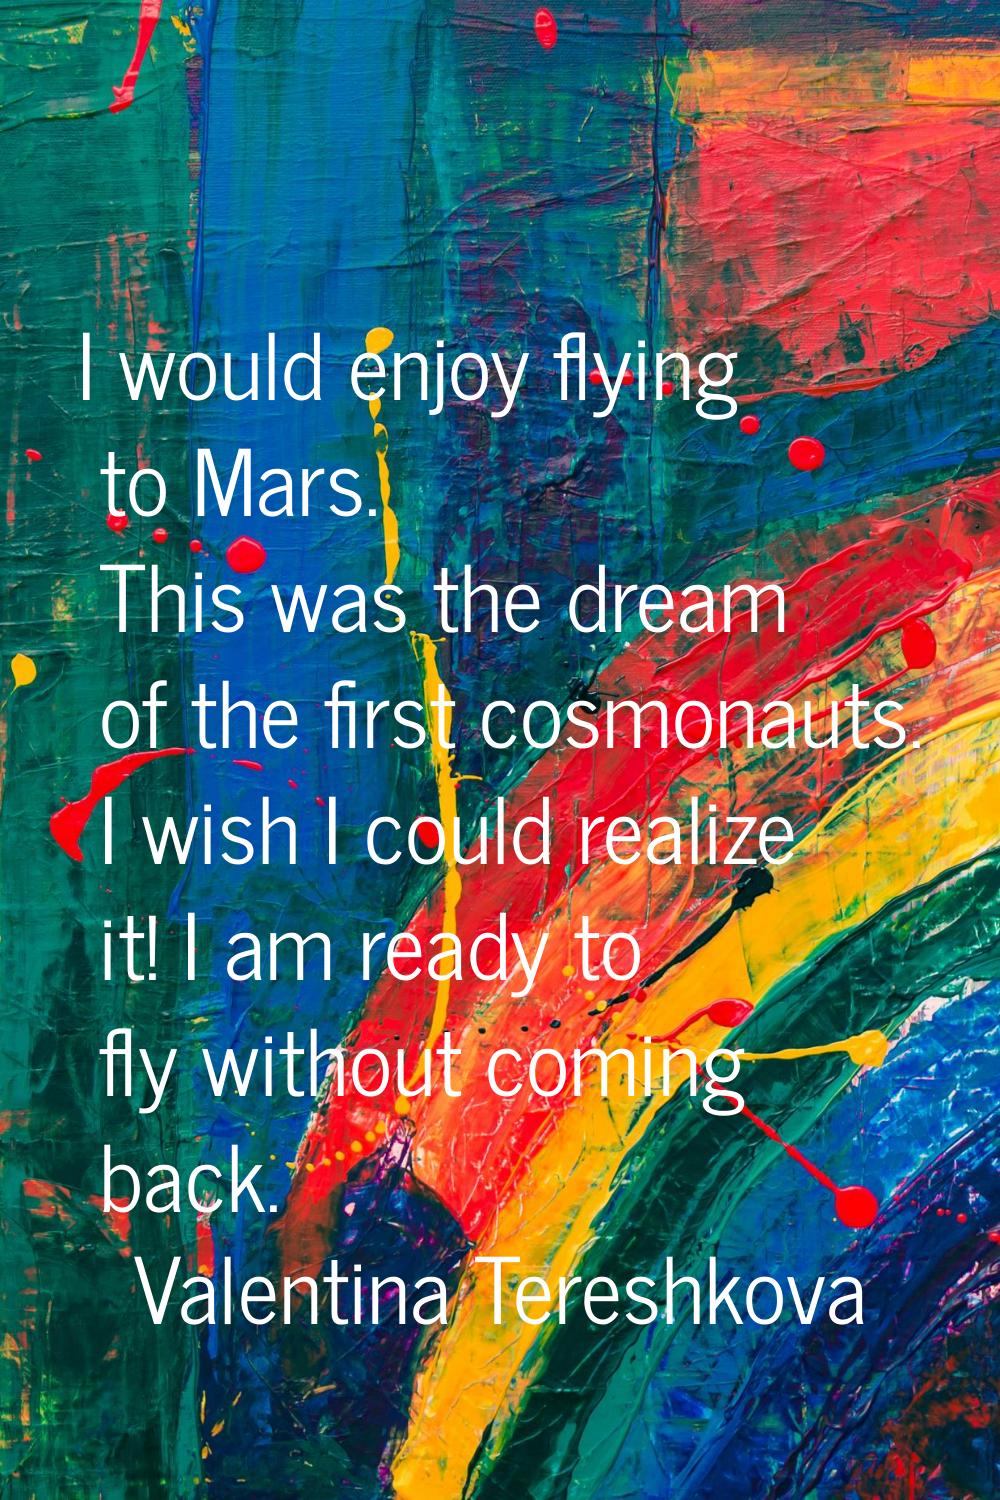 I would enjoy flying to Mars. This was the dream of the first cosmonauts. I wish I could realize it